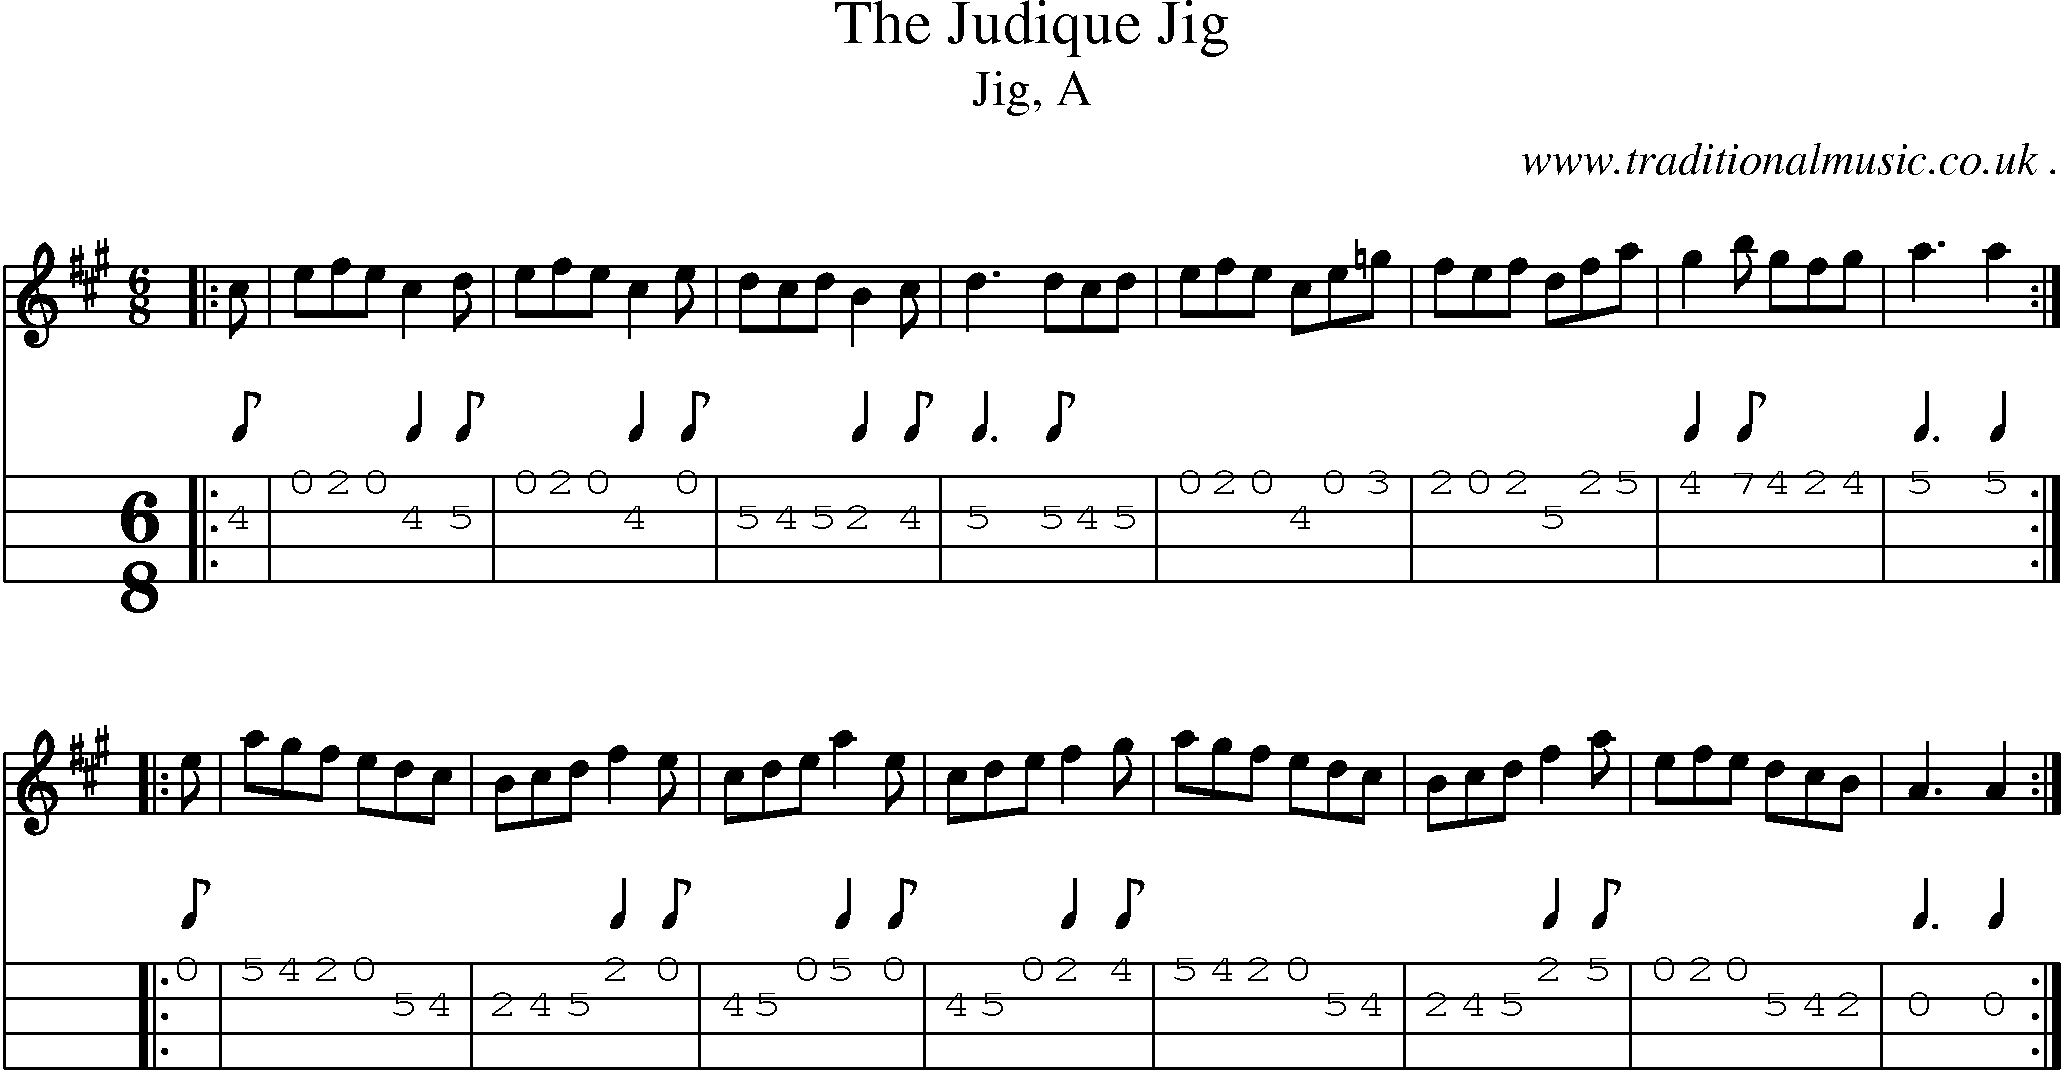 Sheet-music  score, Chords and Mandolin Tabs for The Judique Jig